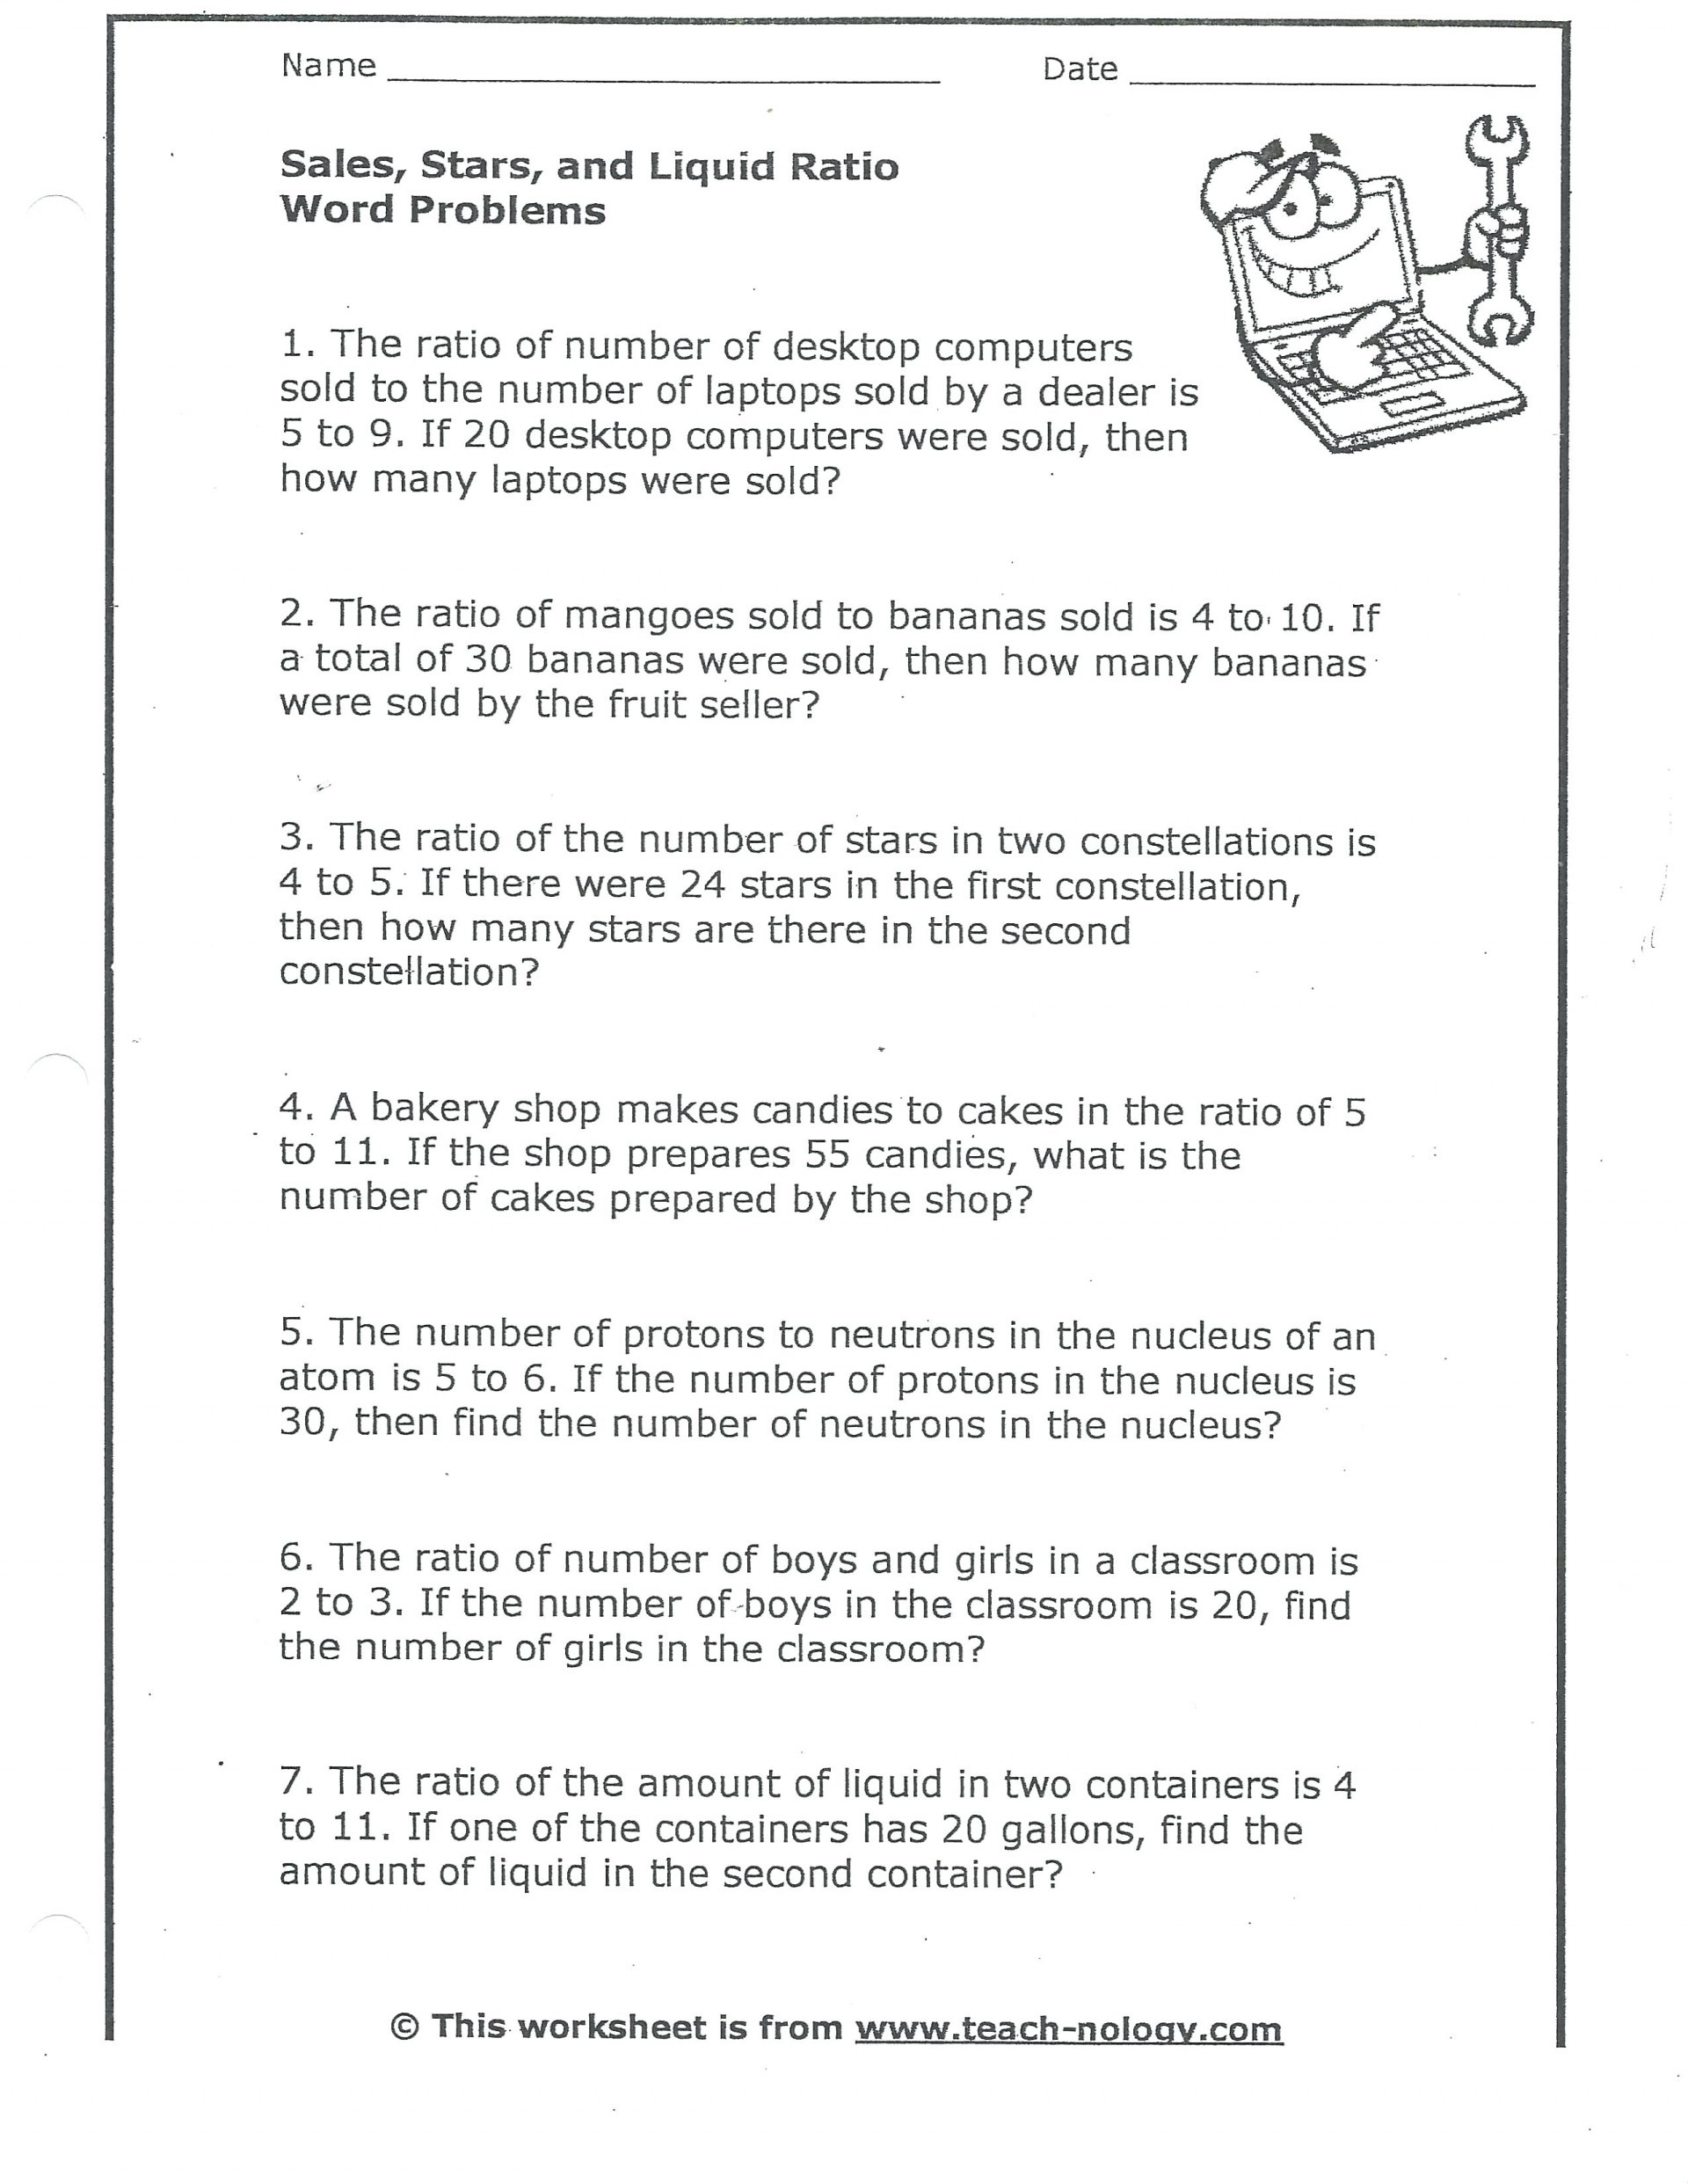 040-6th-grade-word-problem-worksheets-math-best-solutions-of-db-excel